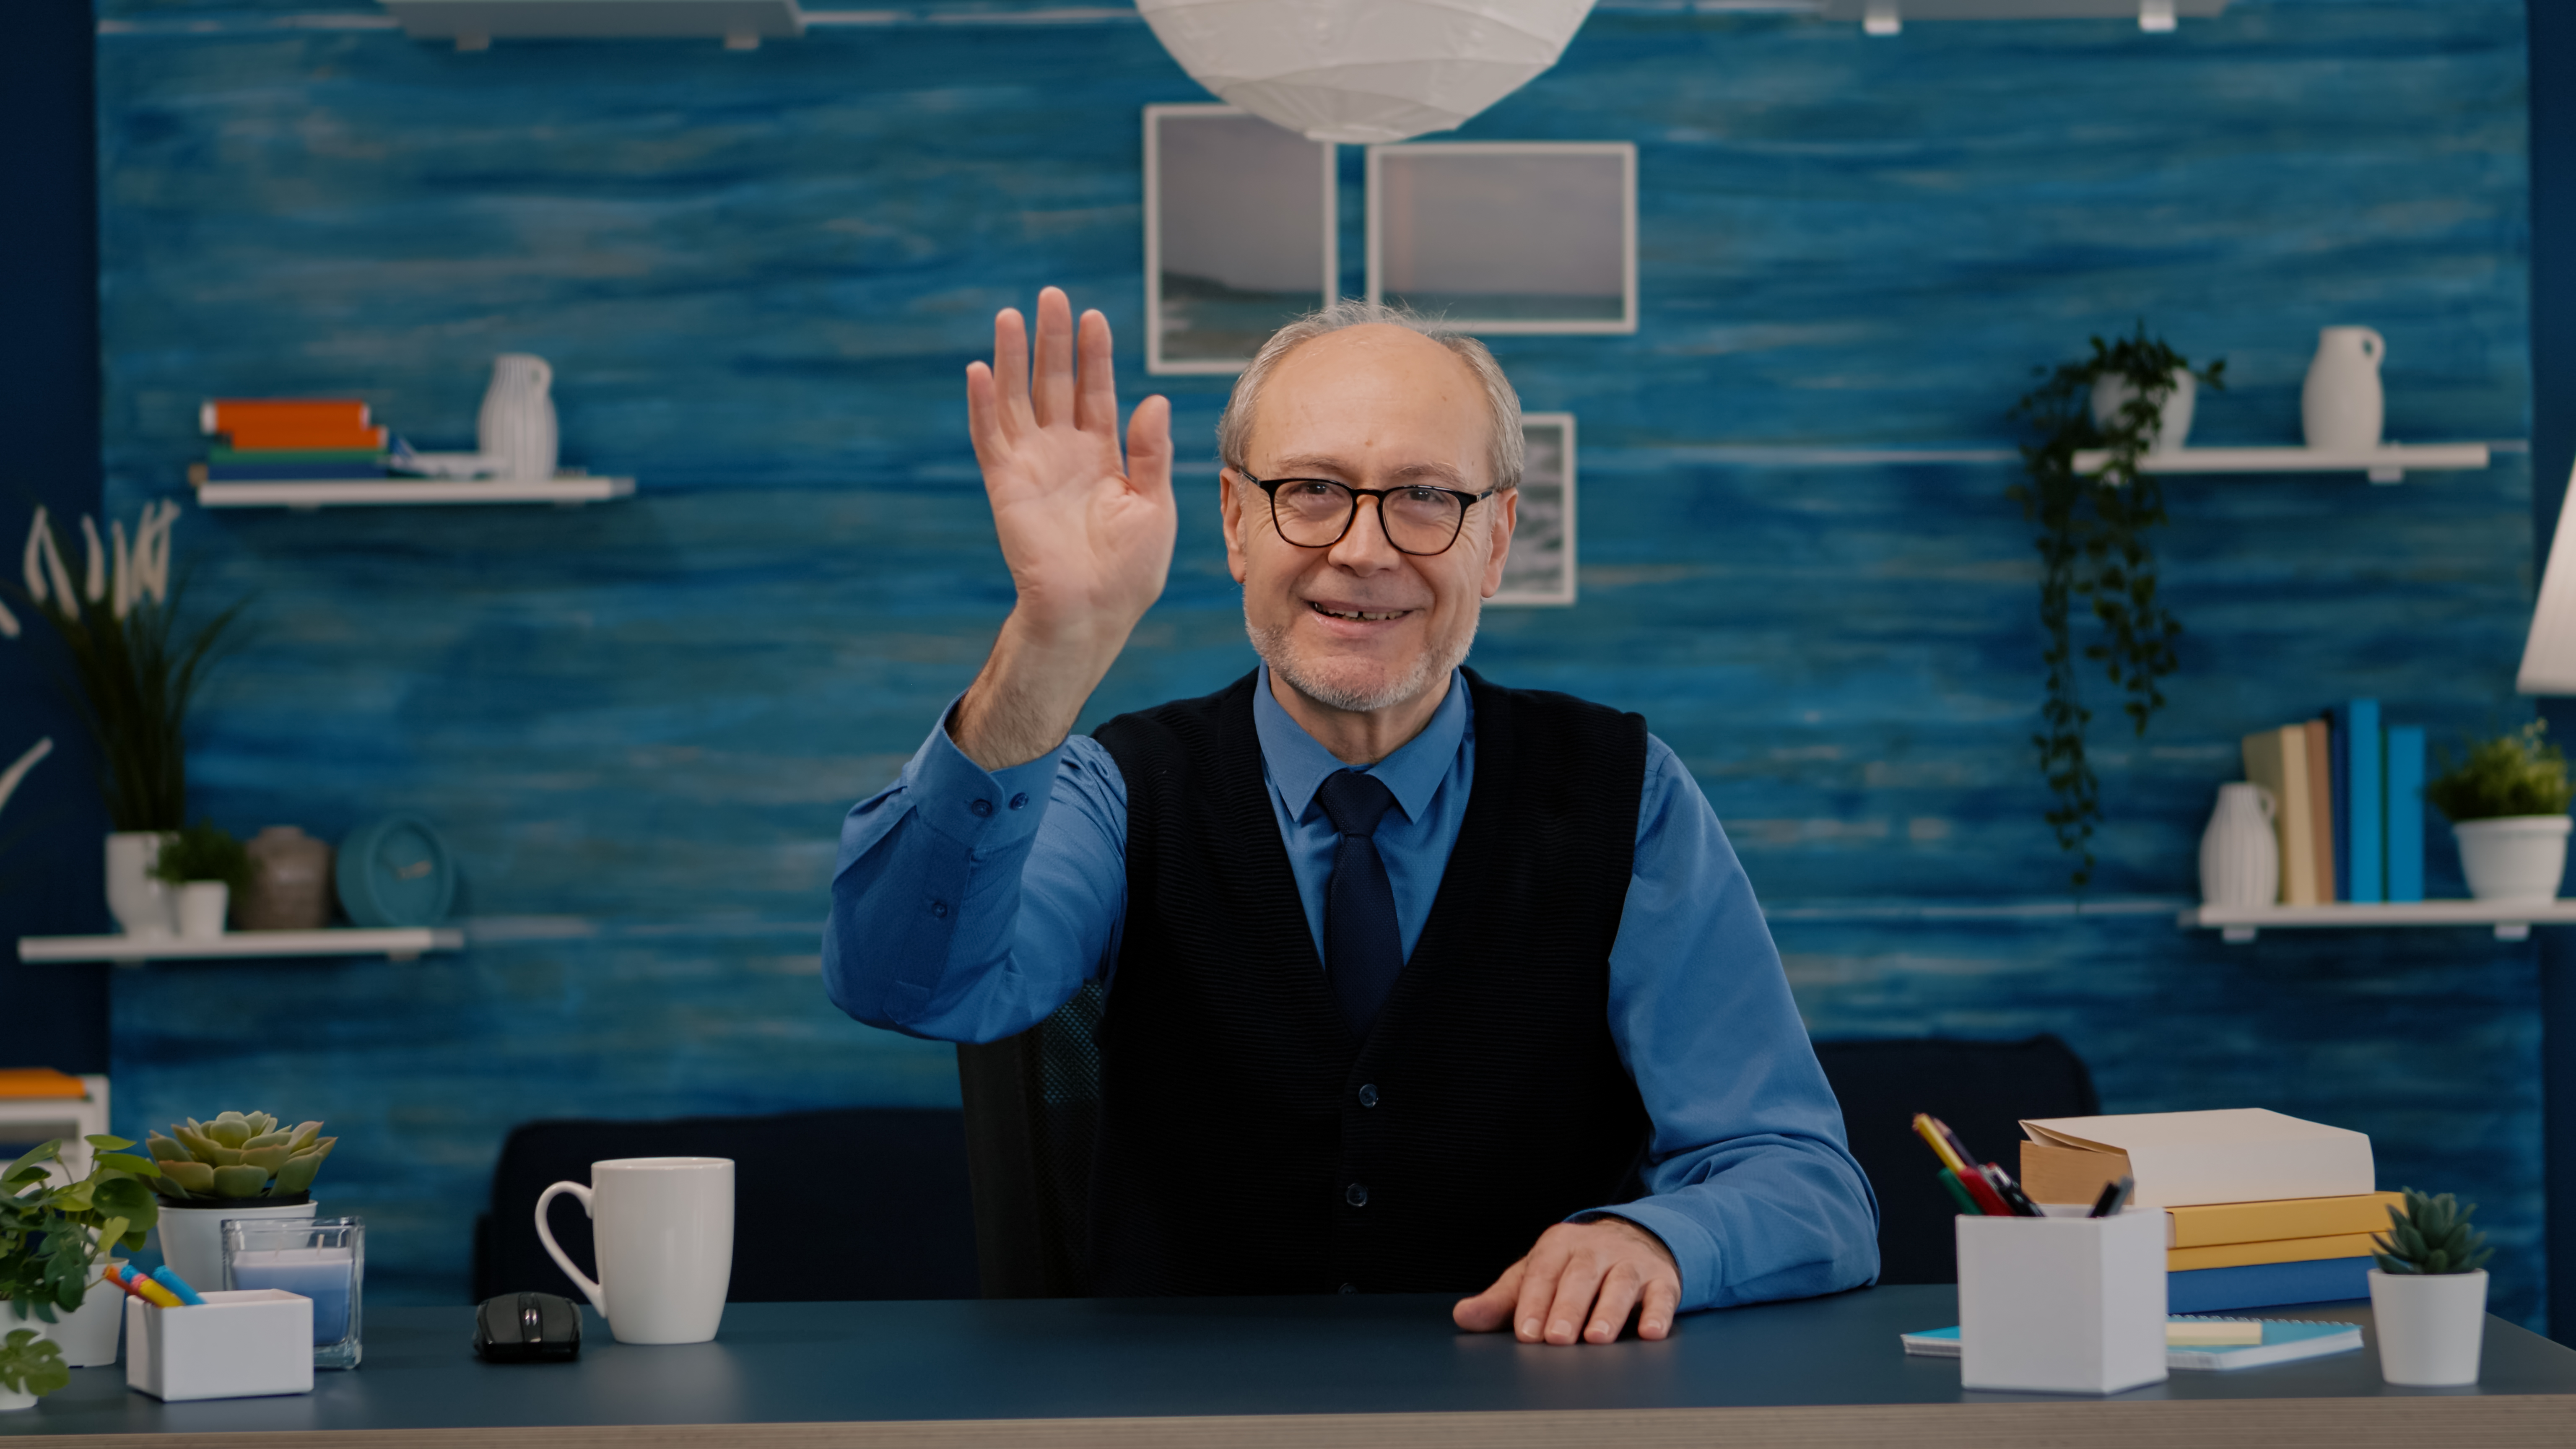 POV of elderly aged man waving during a video conference